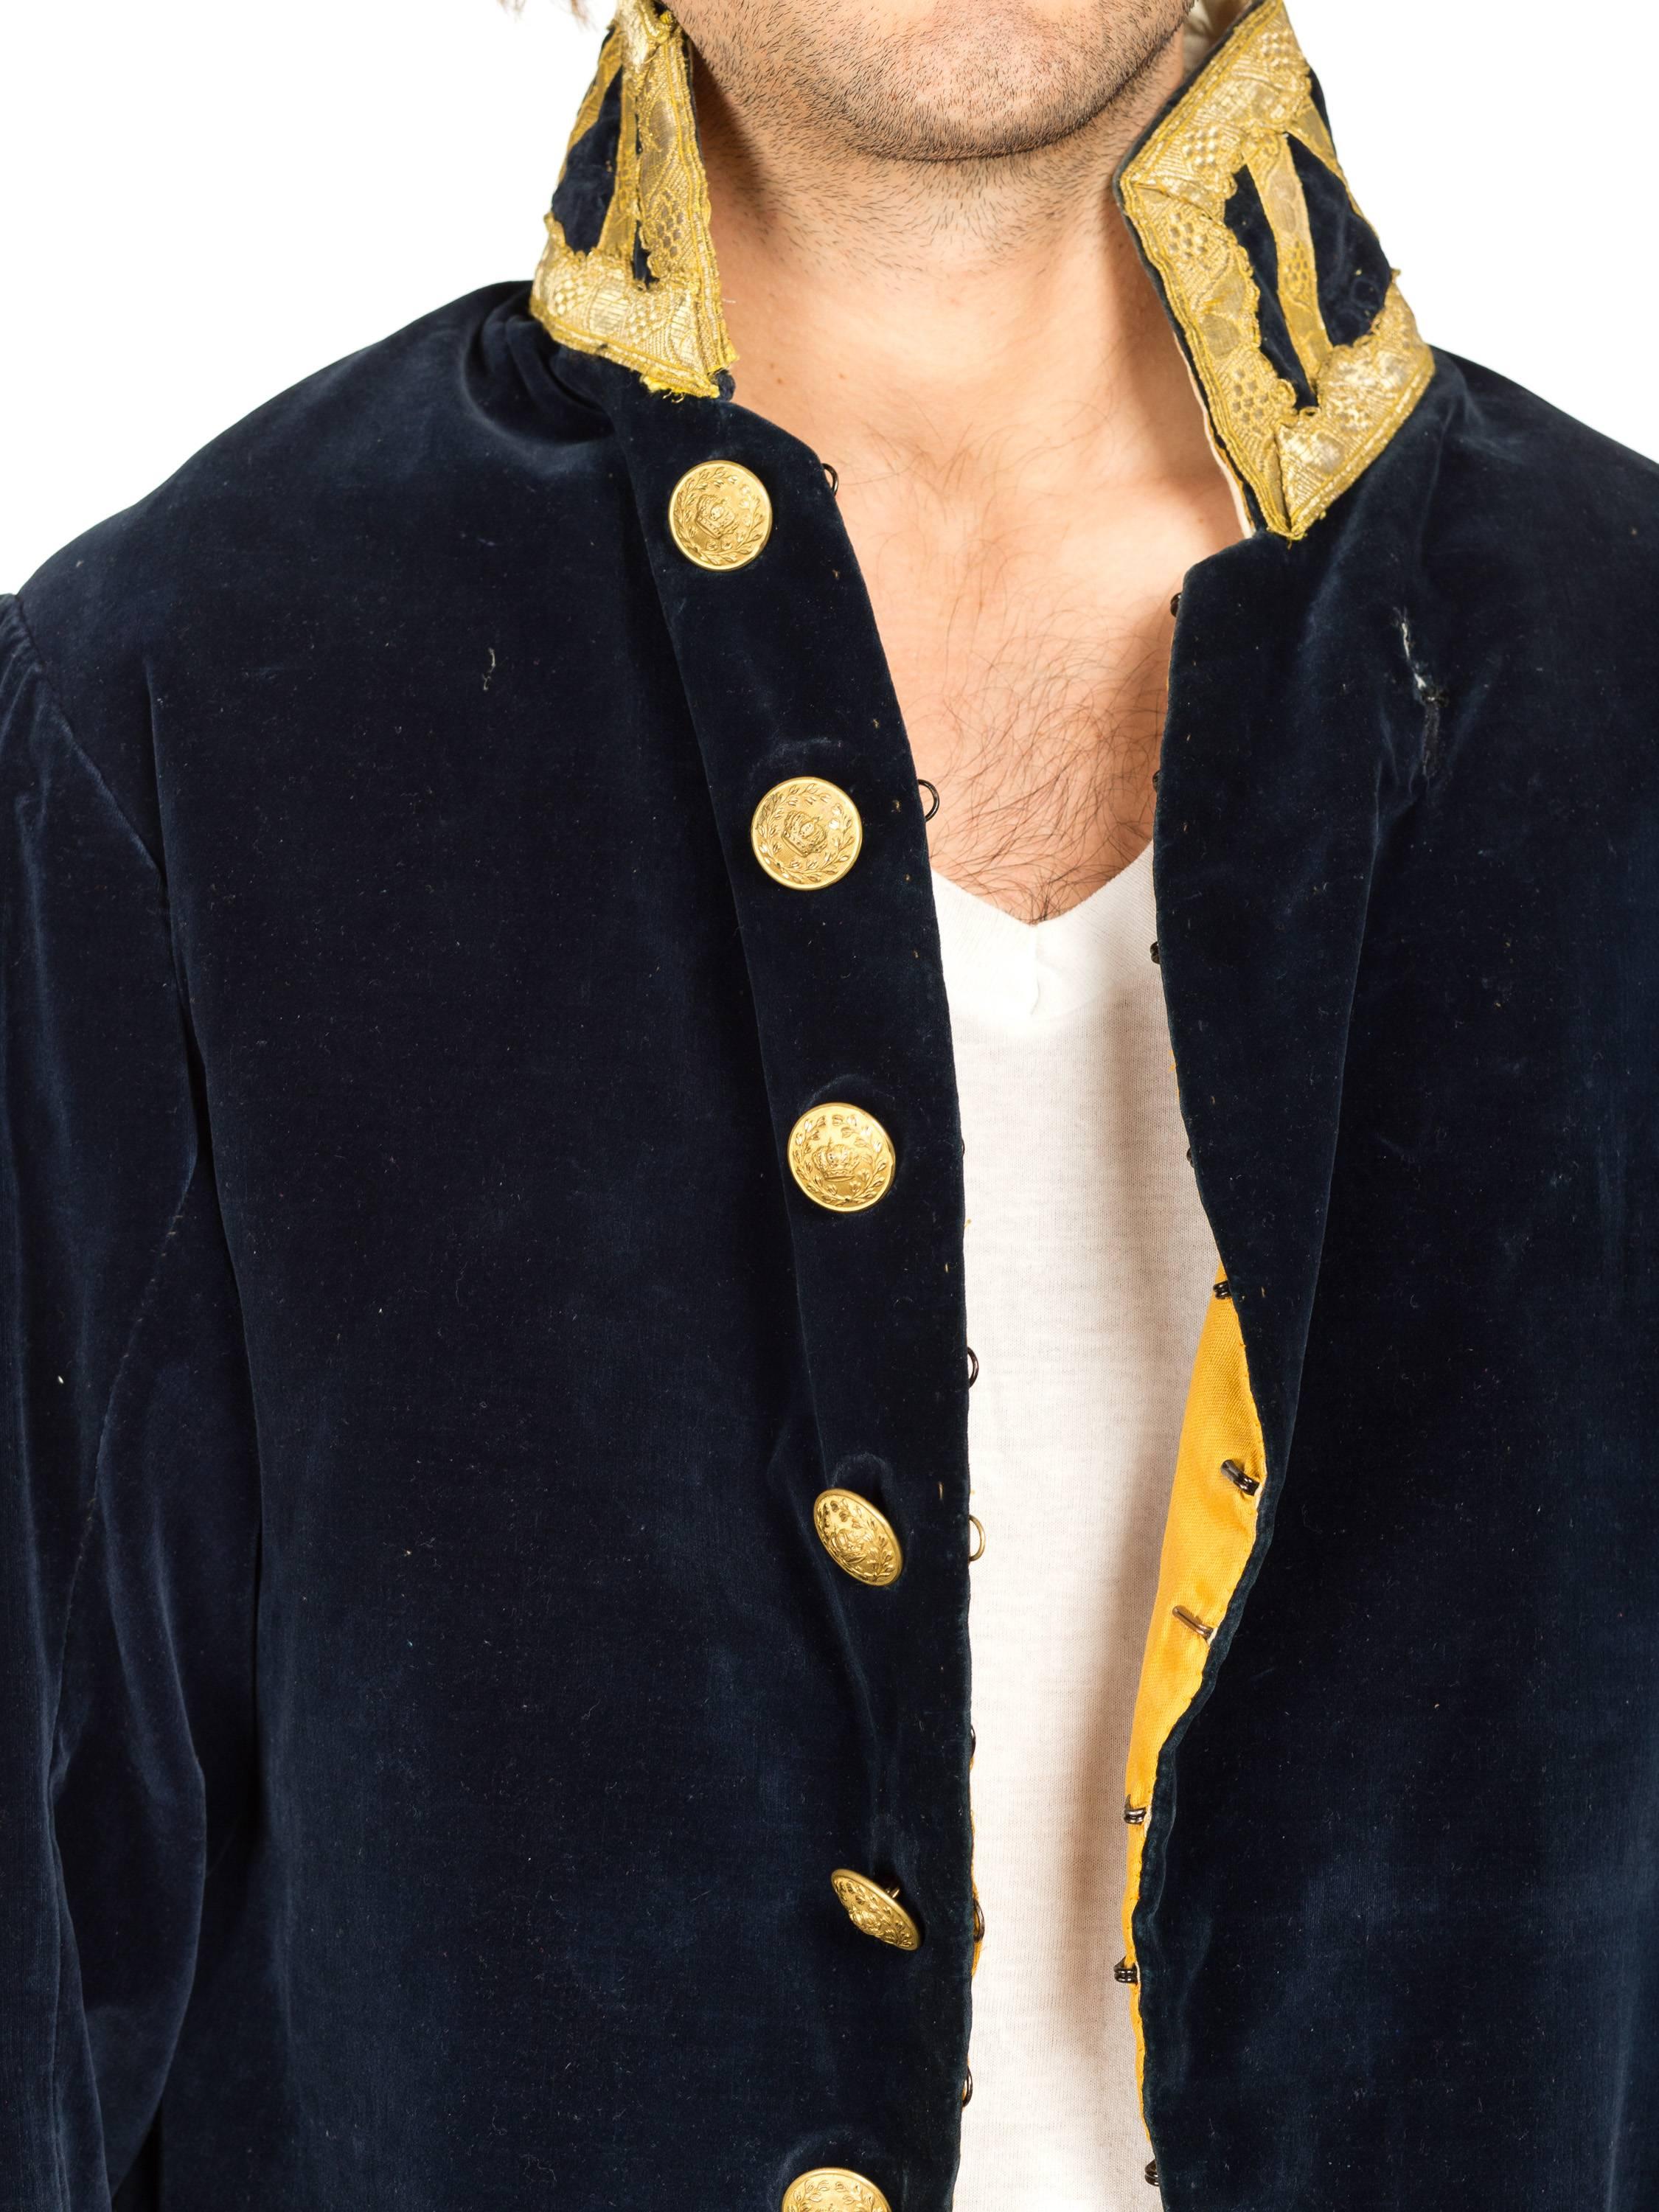 Victorian Men's Frock Coat in the 18th Century Style  4